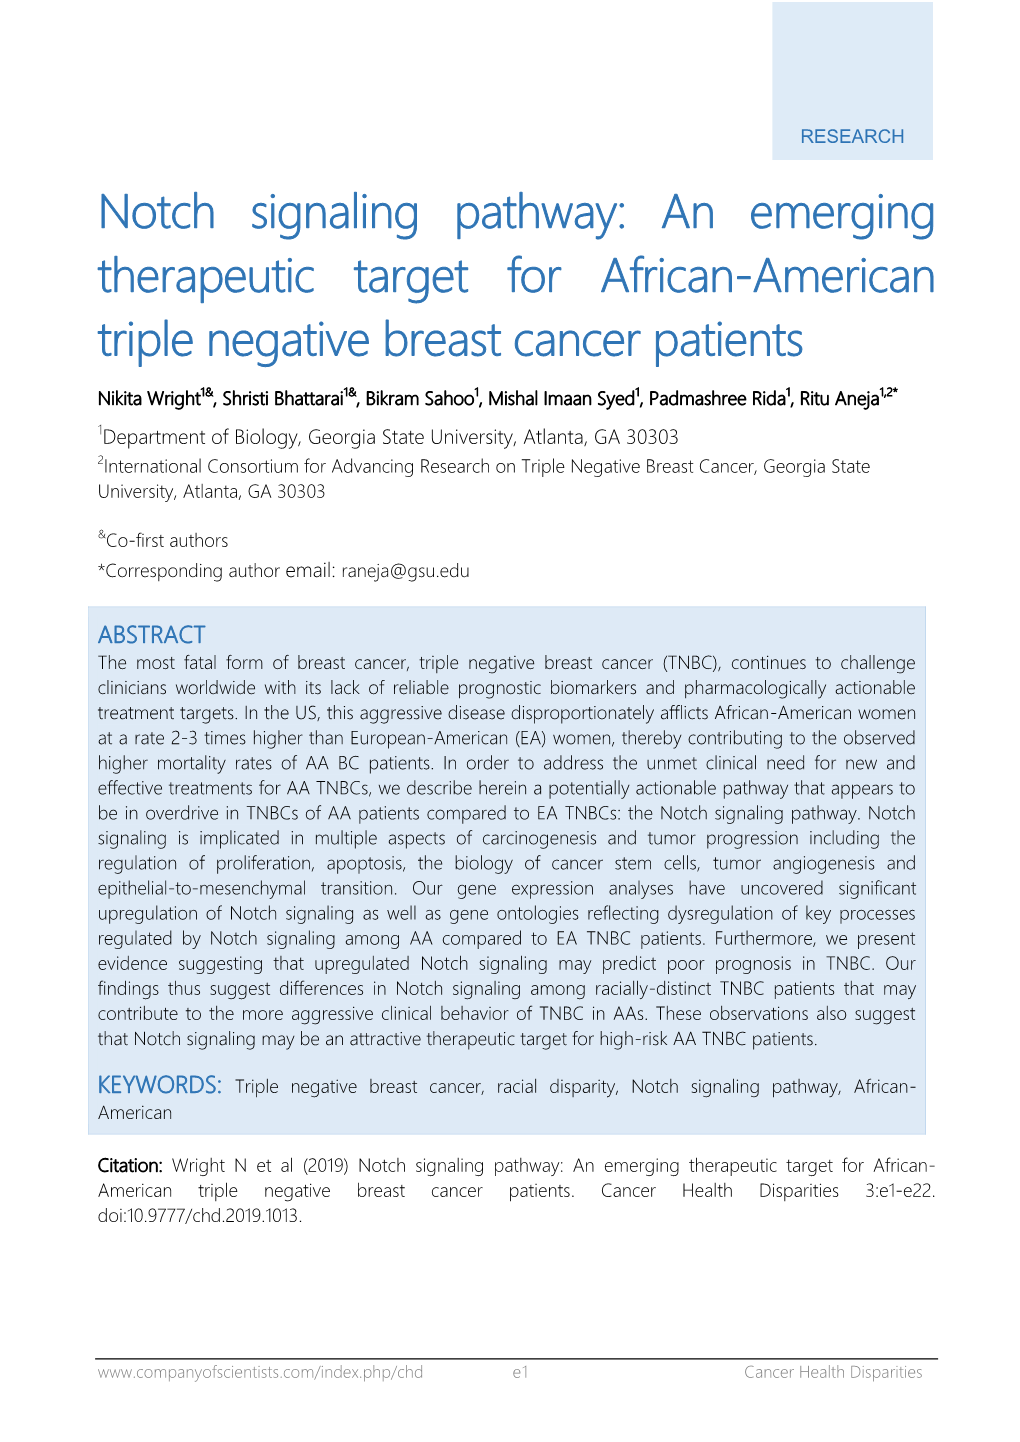 Notch Signaling Pathway: an Emerging Therapeutic Target for African-American Triple Negative Breast Cancer Patients